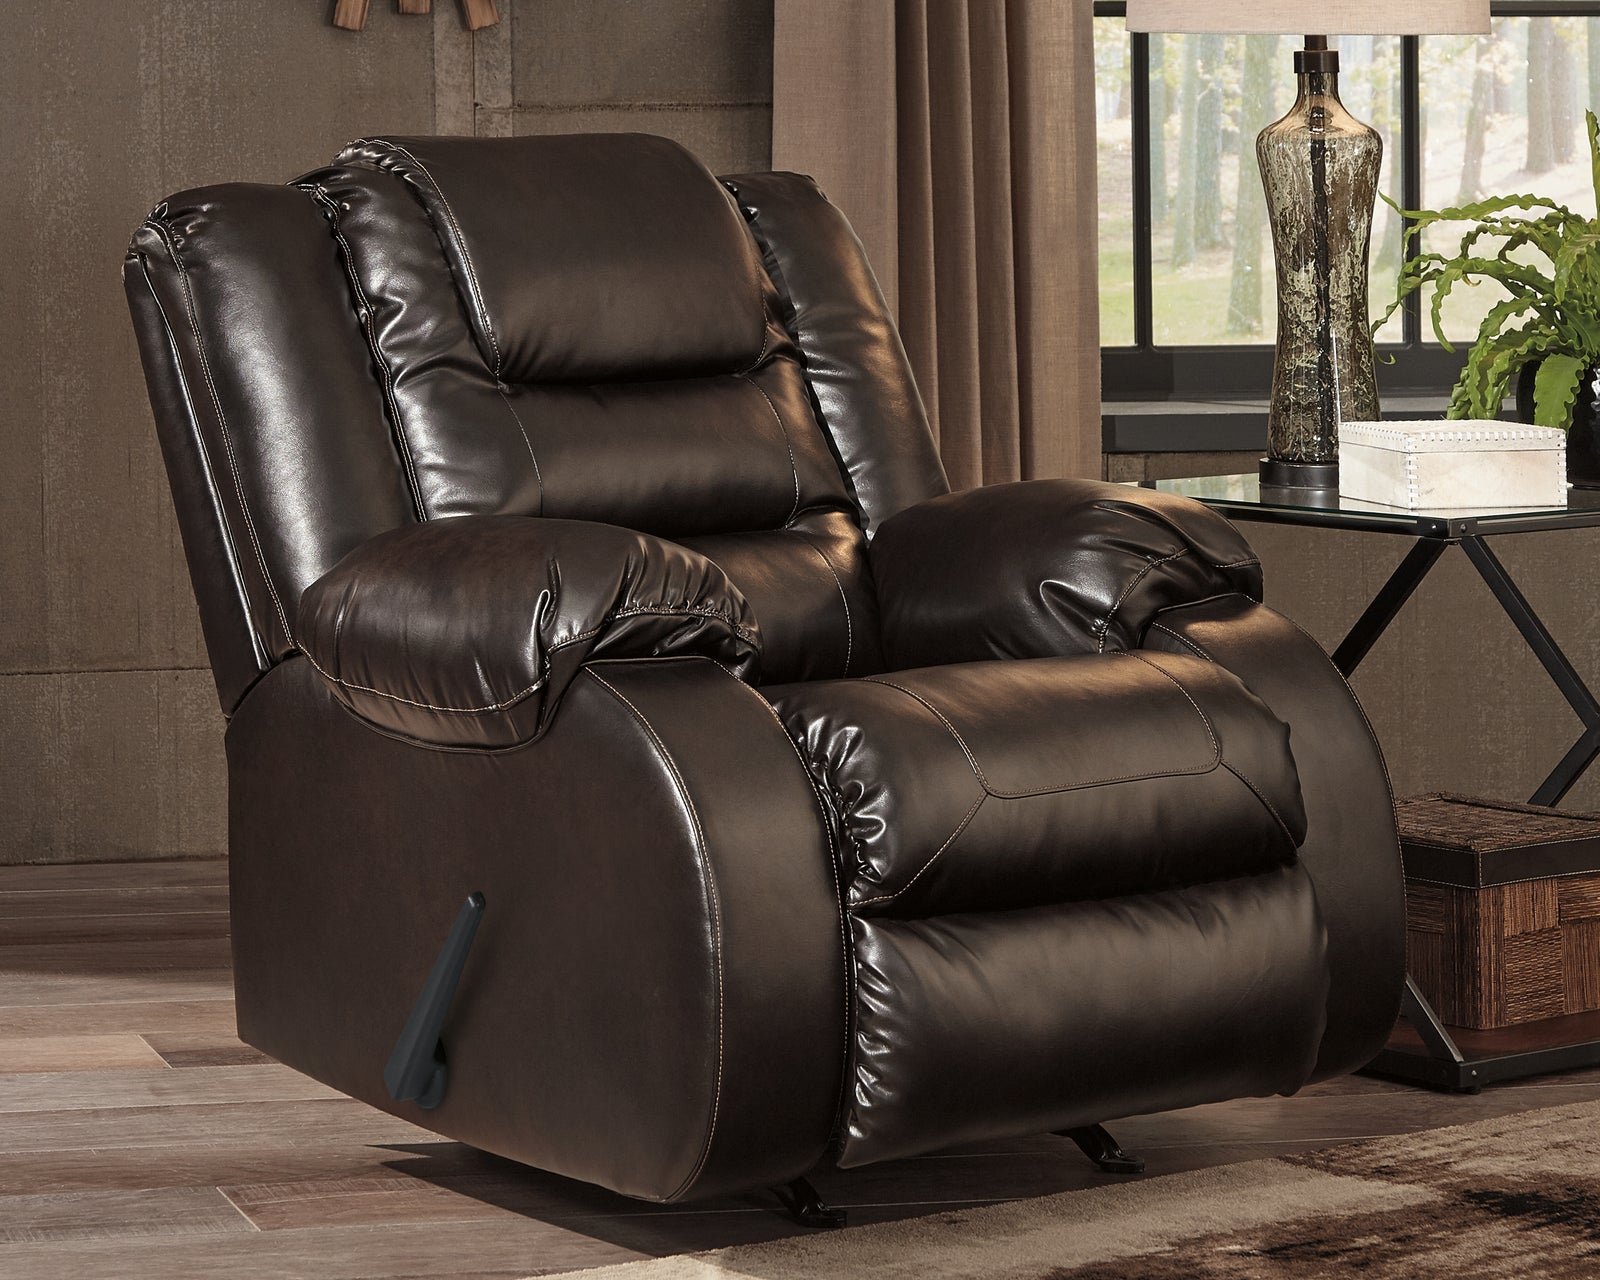 Vacherie Chocolate Faux Leather Recliner